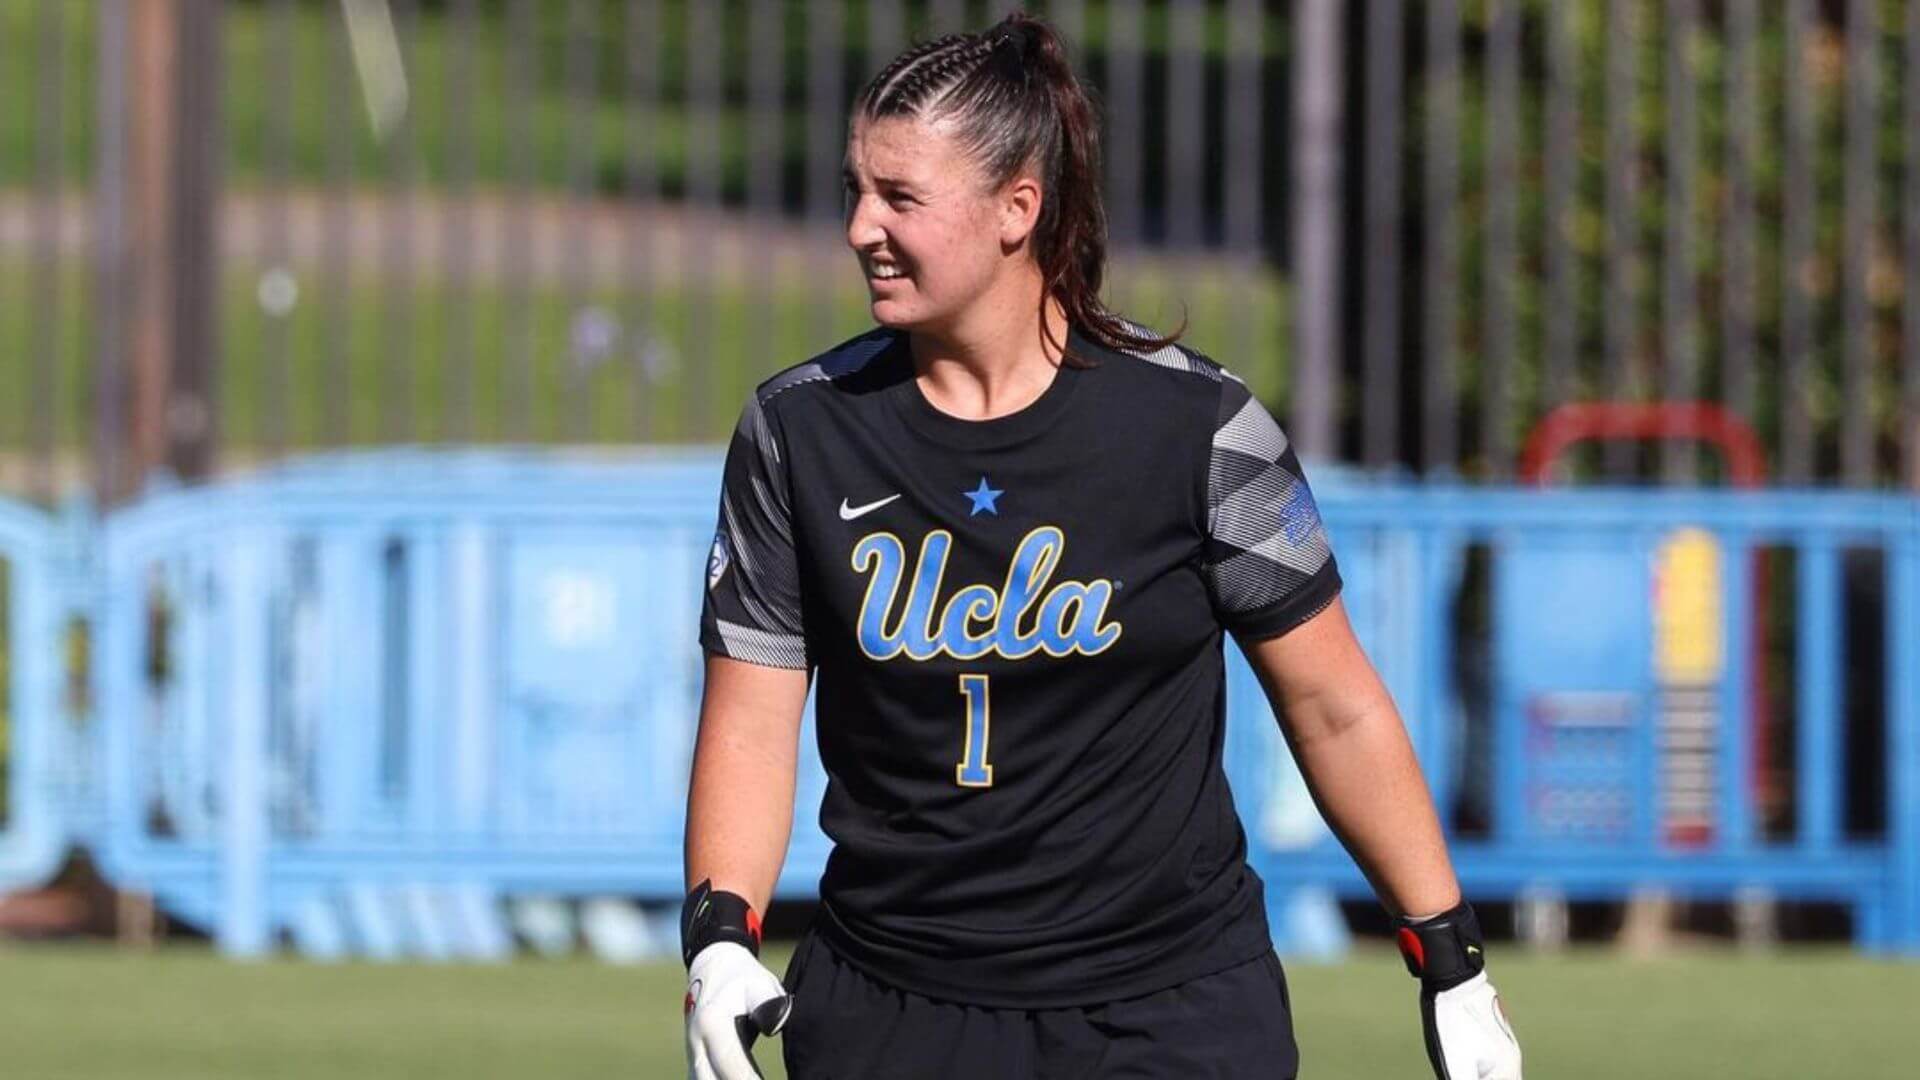 UCLA is one of the best goalkeeping programs in the NCAA